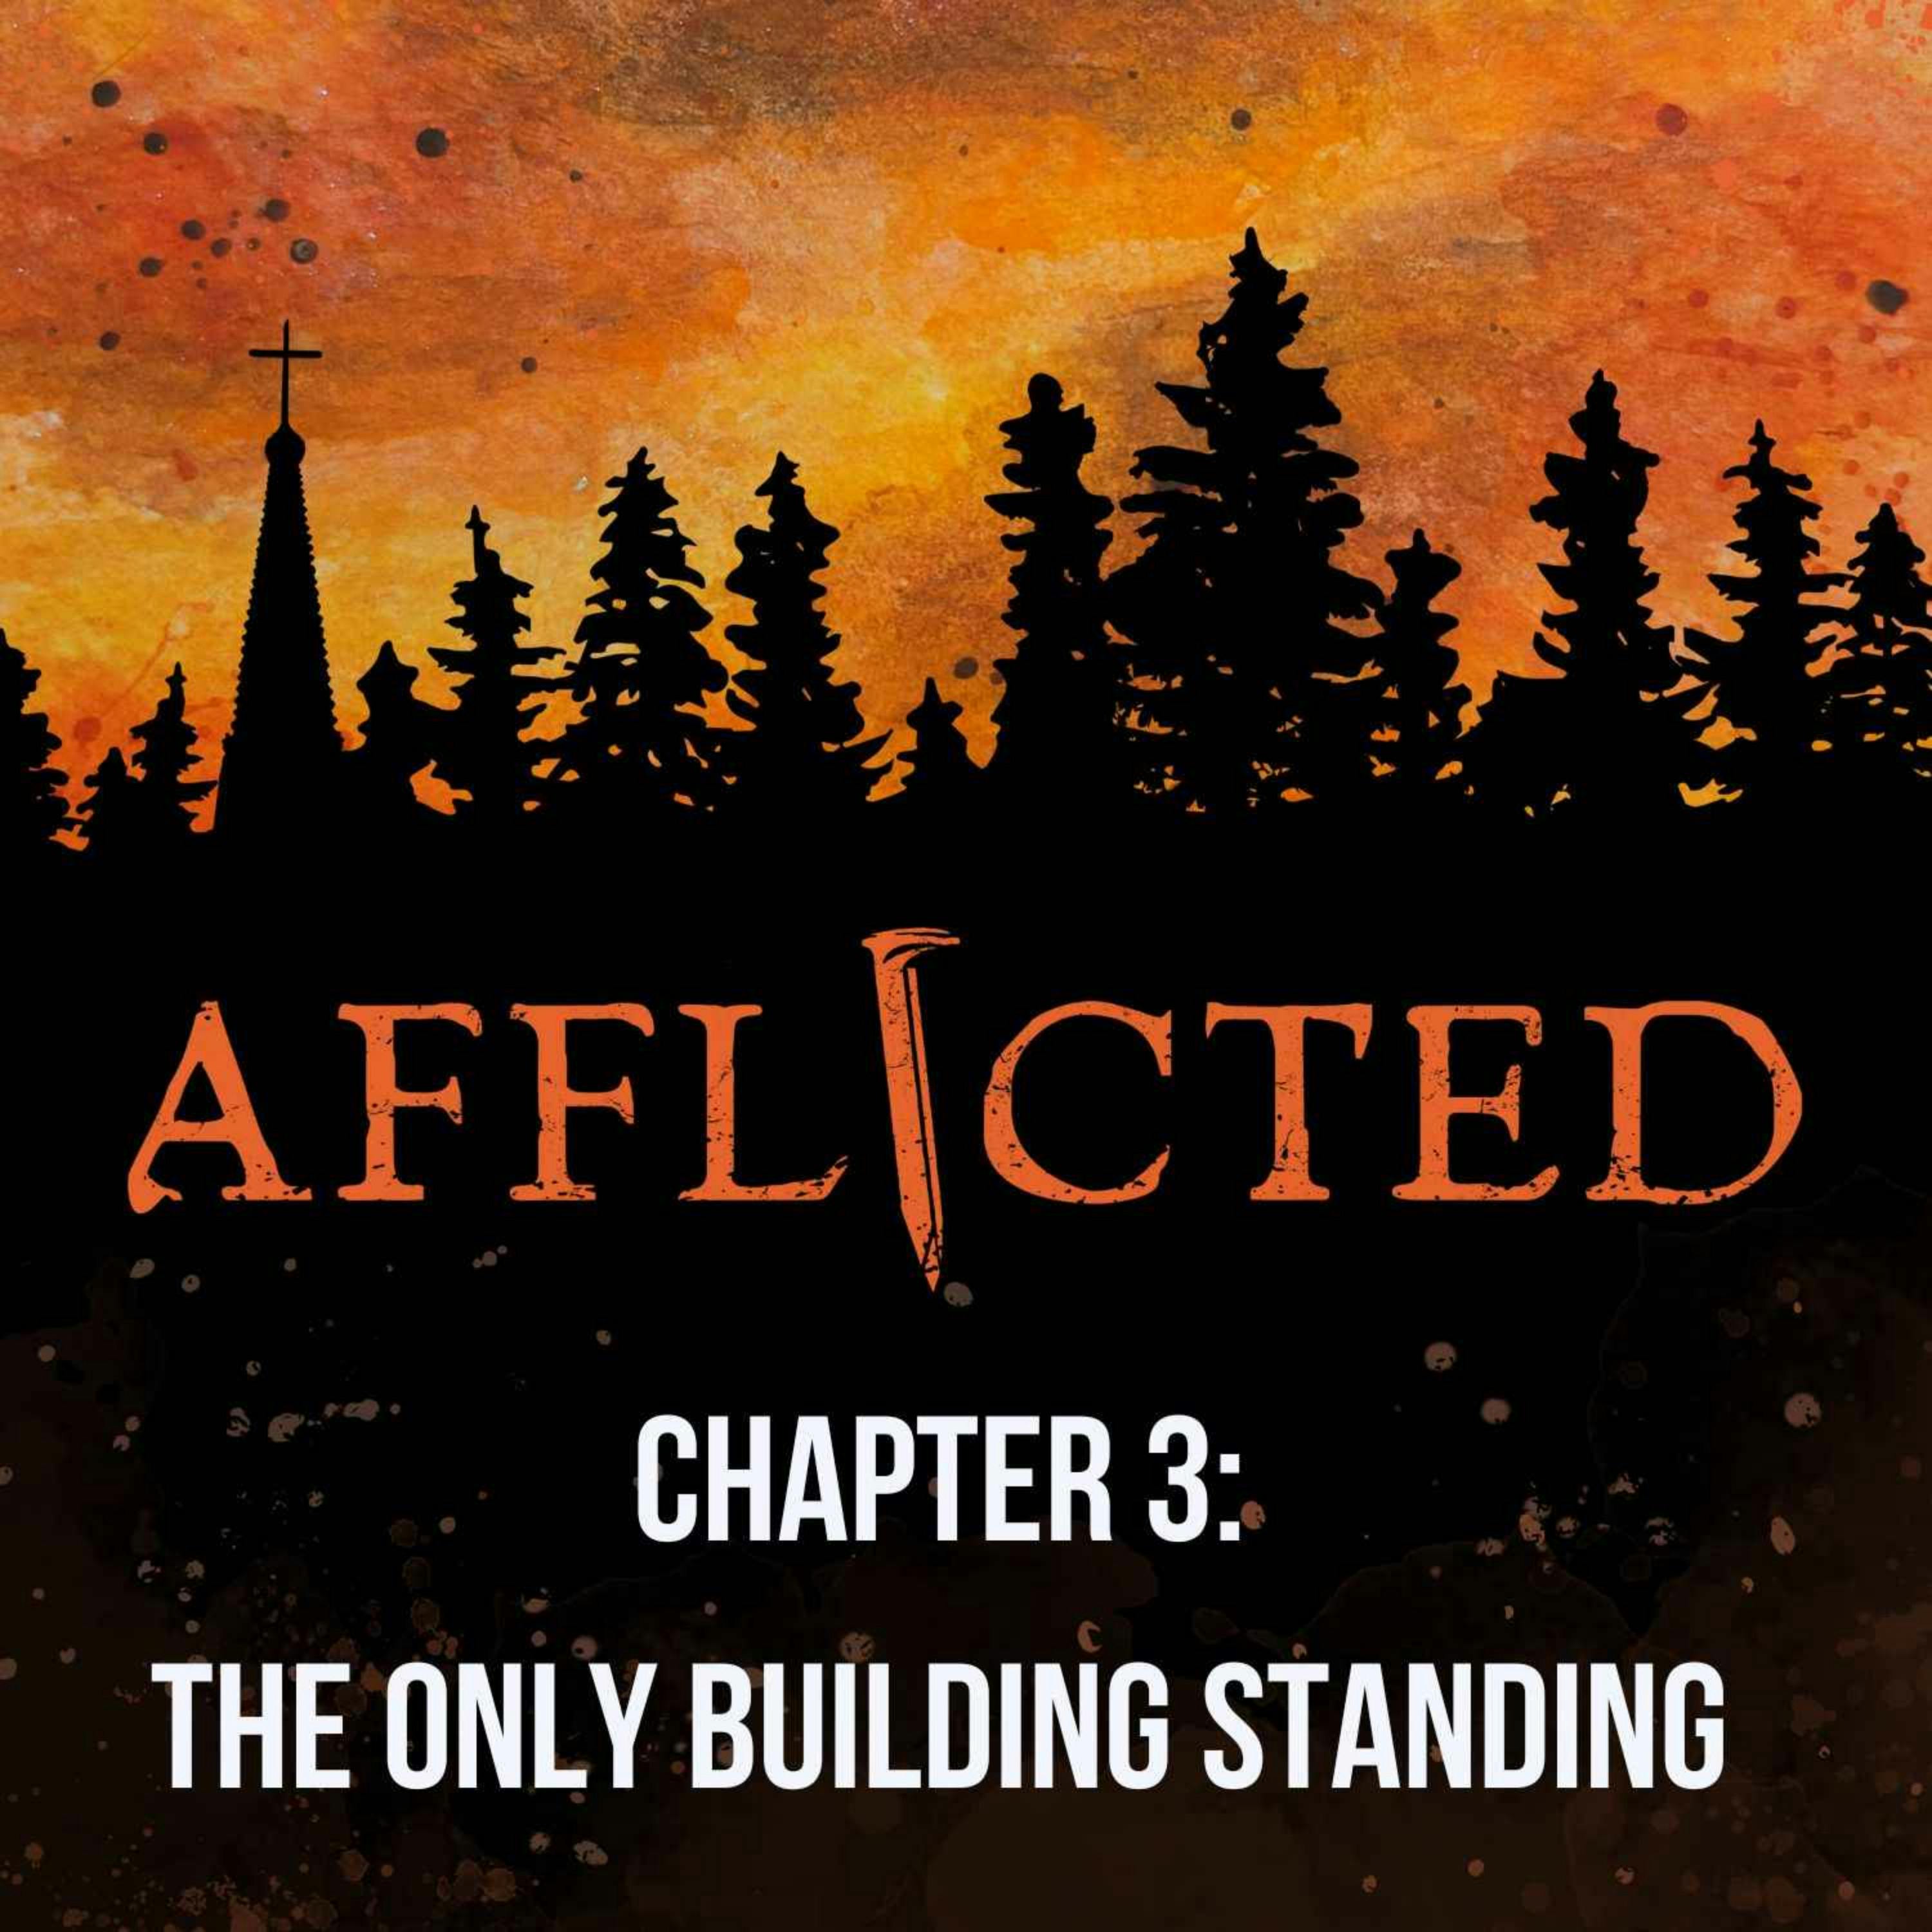 Chapter 3: The Only Building Standing